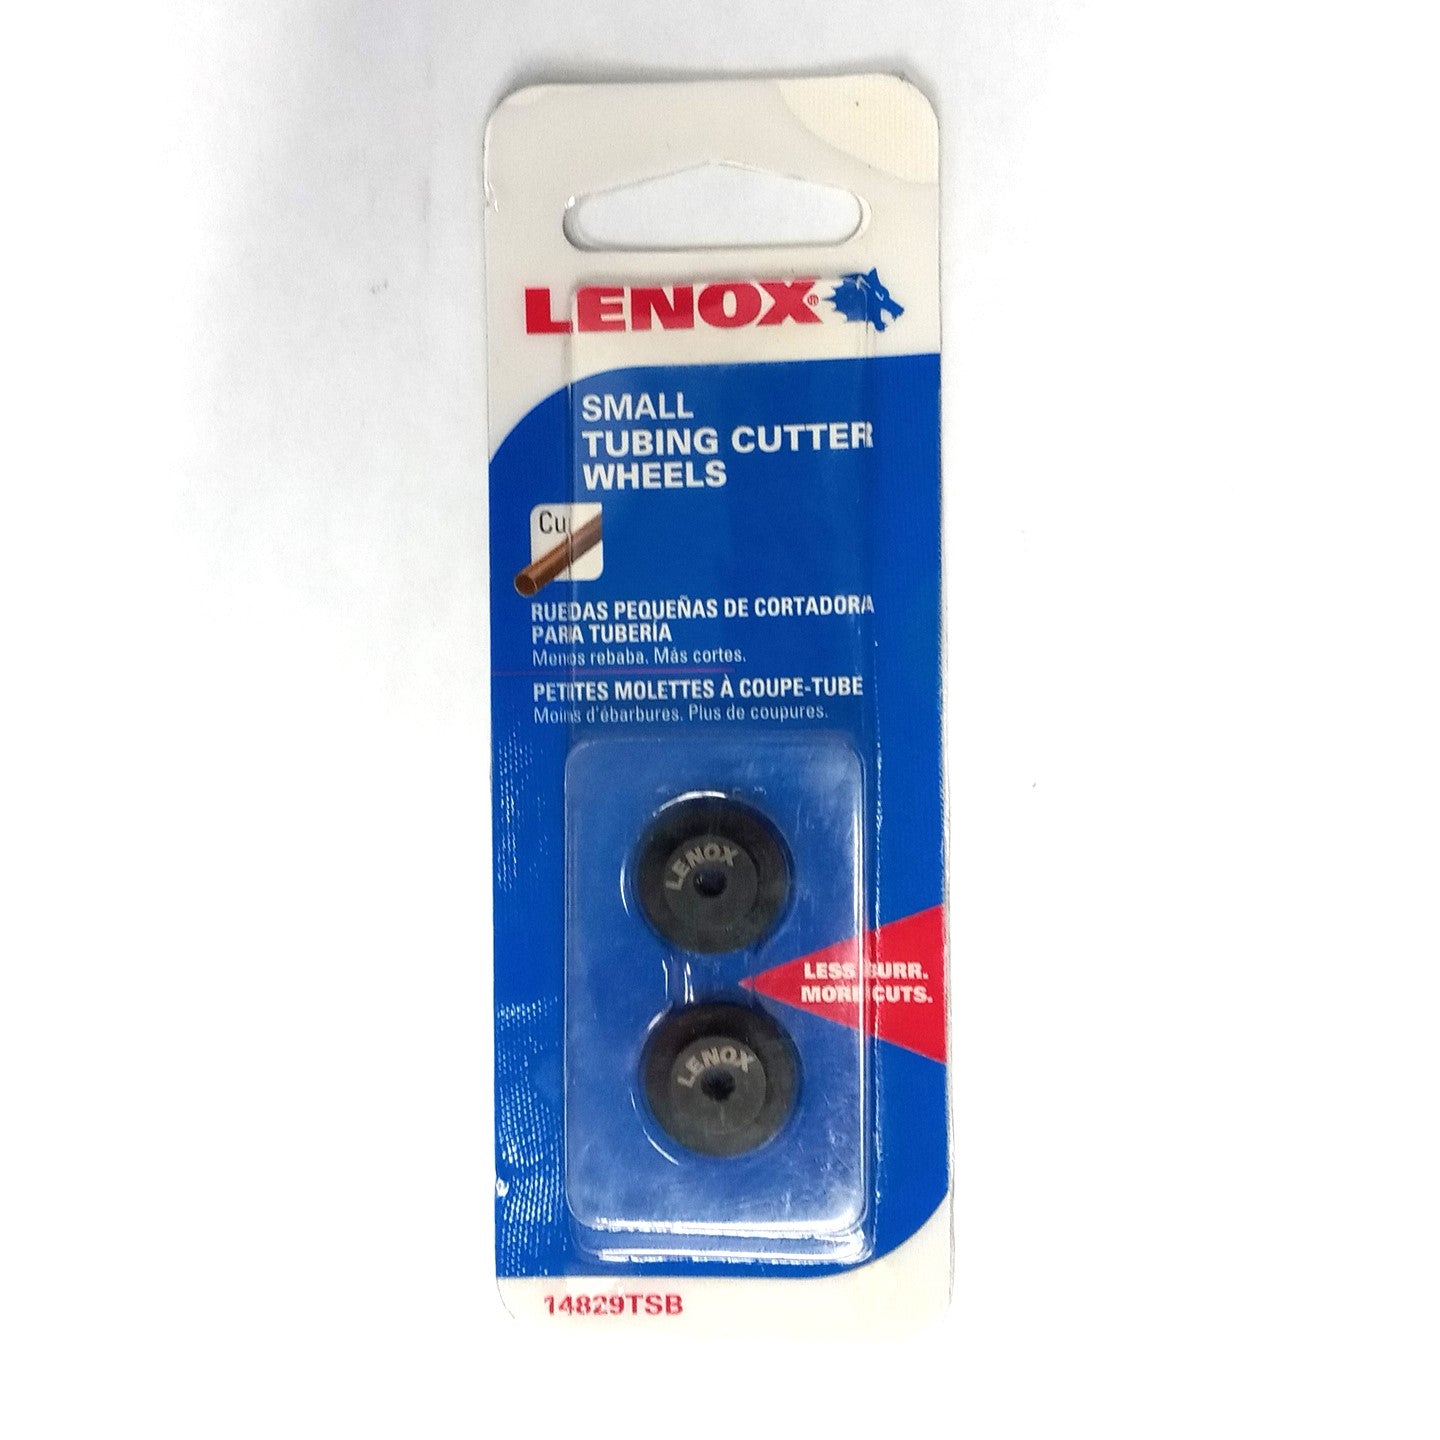 Lenox 14829TSB Steel Replacement Cutting Wheel for Tight-Spot Tubing Cutter, 2Pk